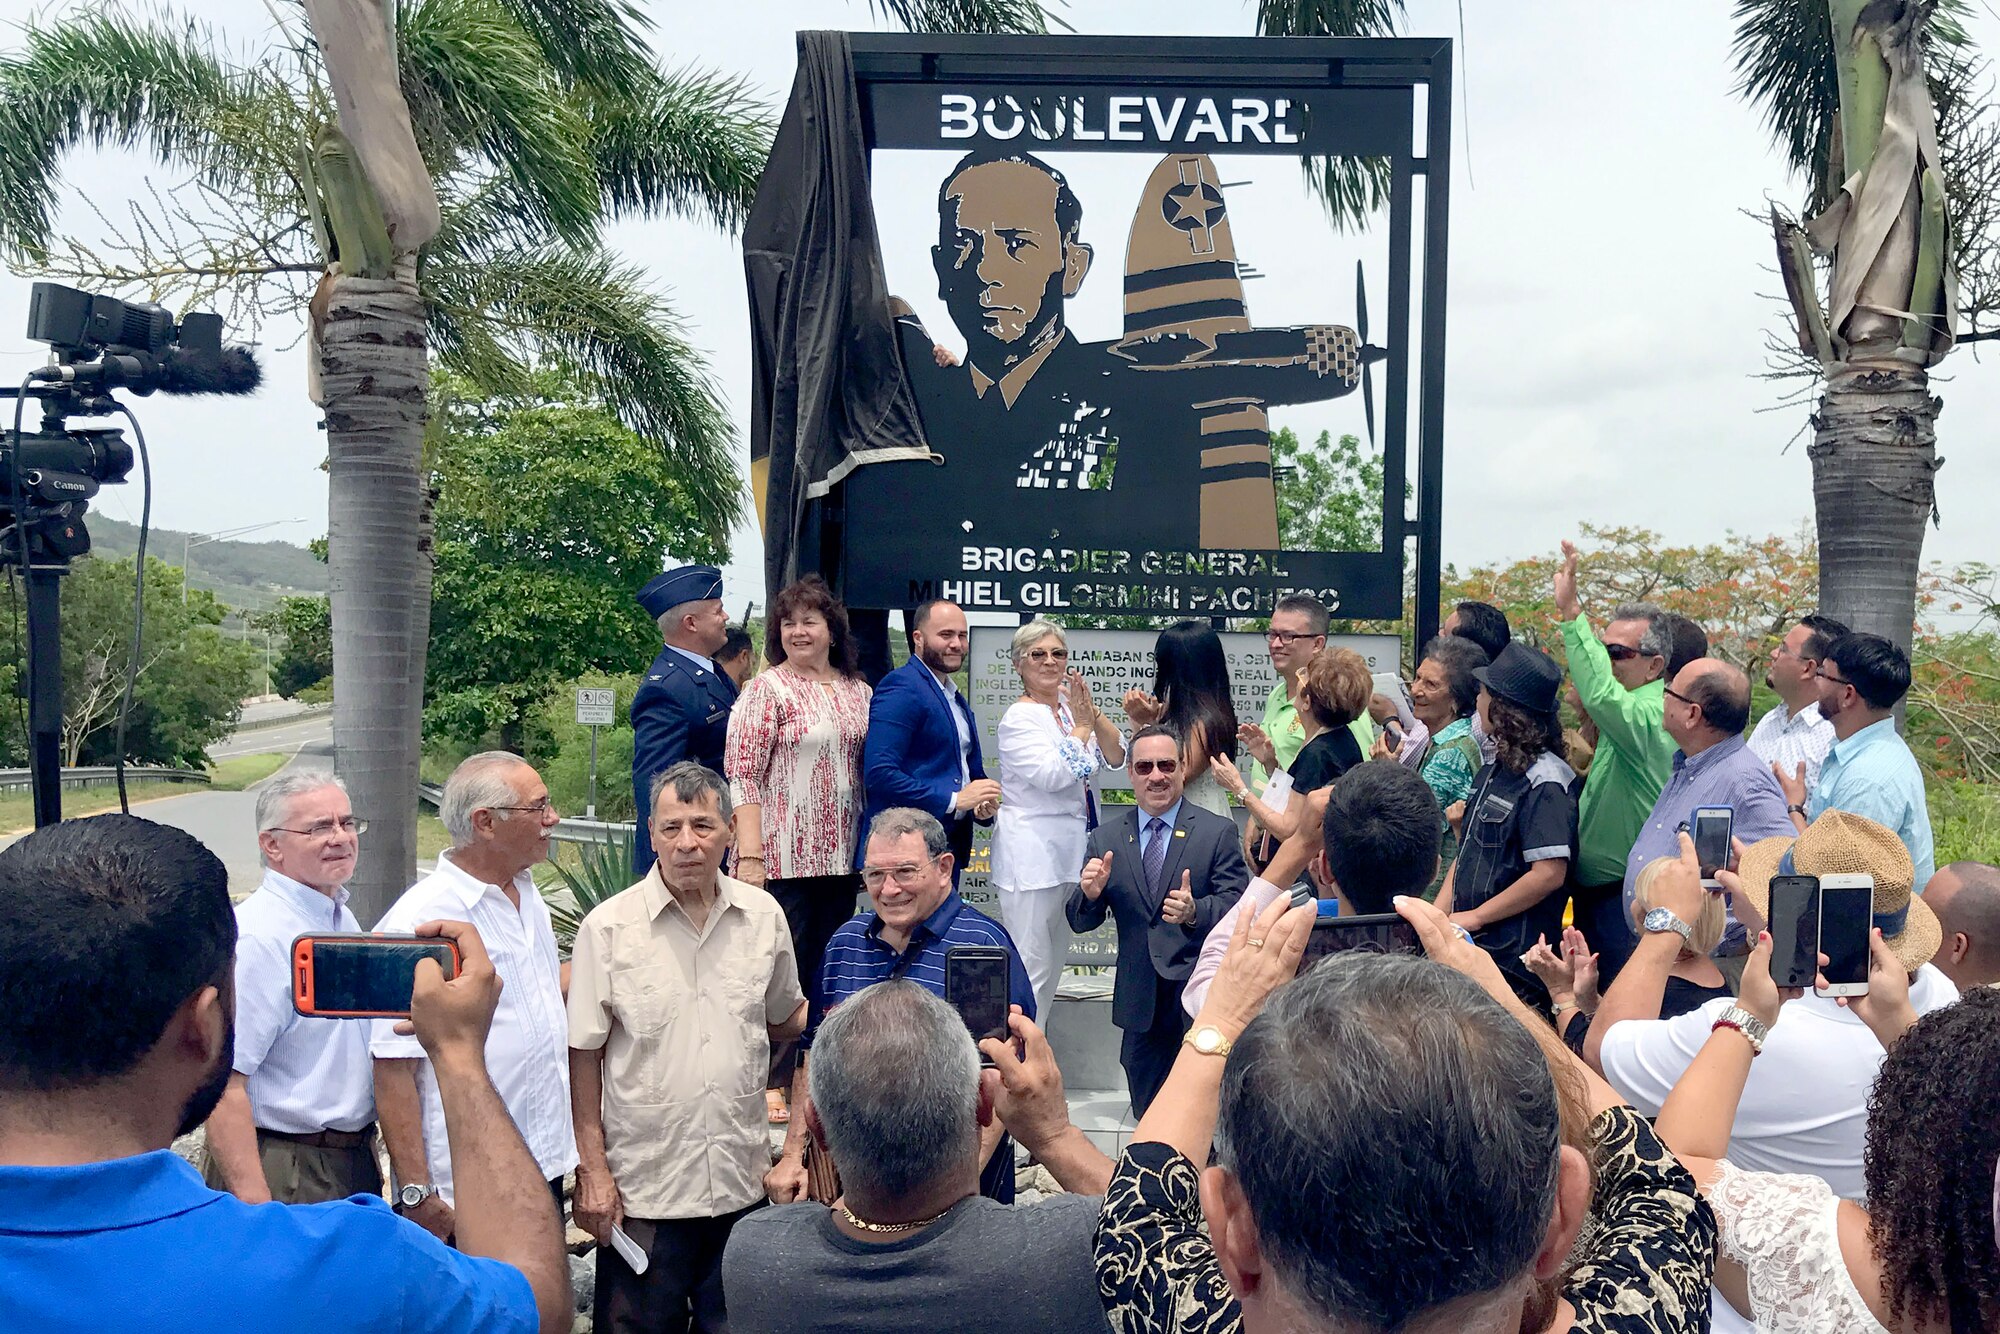 U.S. Air Force Brig. Gen. Mihiel Gilormini's distinguished visitor pose before his memorial during the posthumous street naming ceremony held in Yauco, Puerto Rico, July 15. (U.S. Air National Guard photo by Staff Sgt. Mizraim Gonzalez/Released)